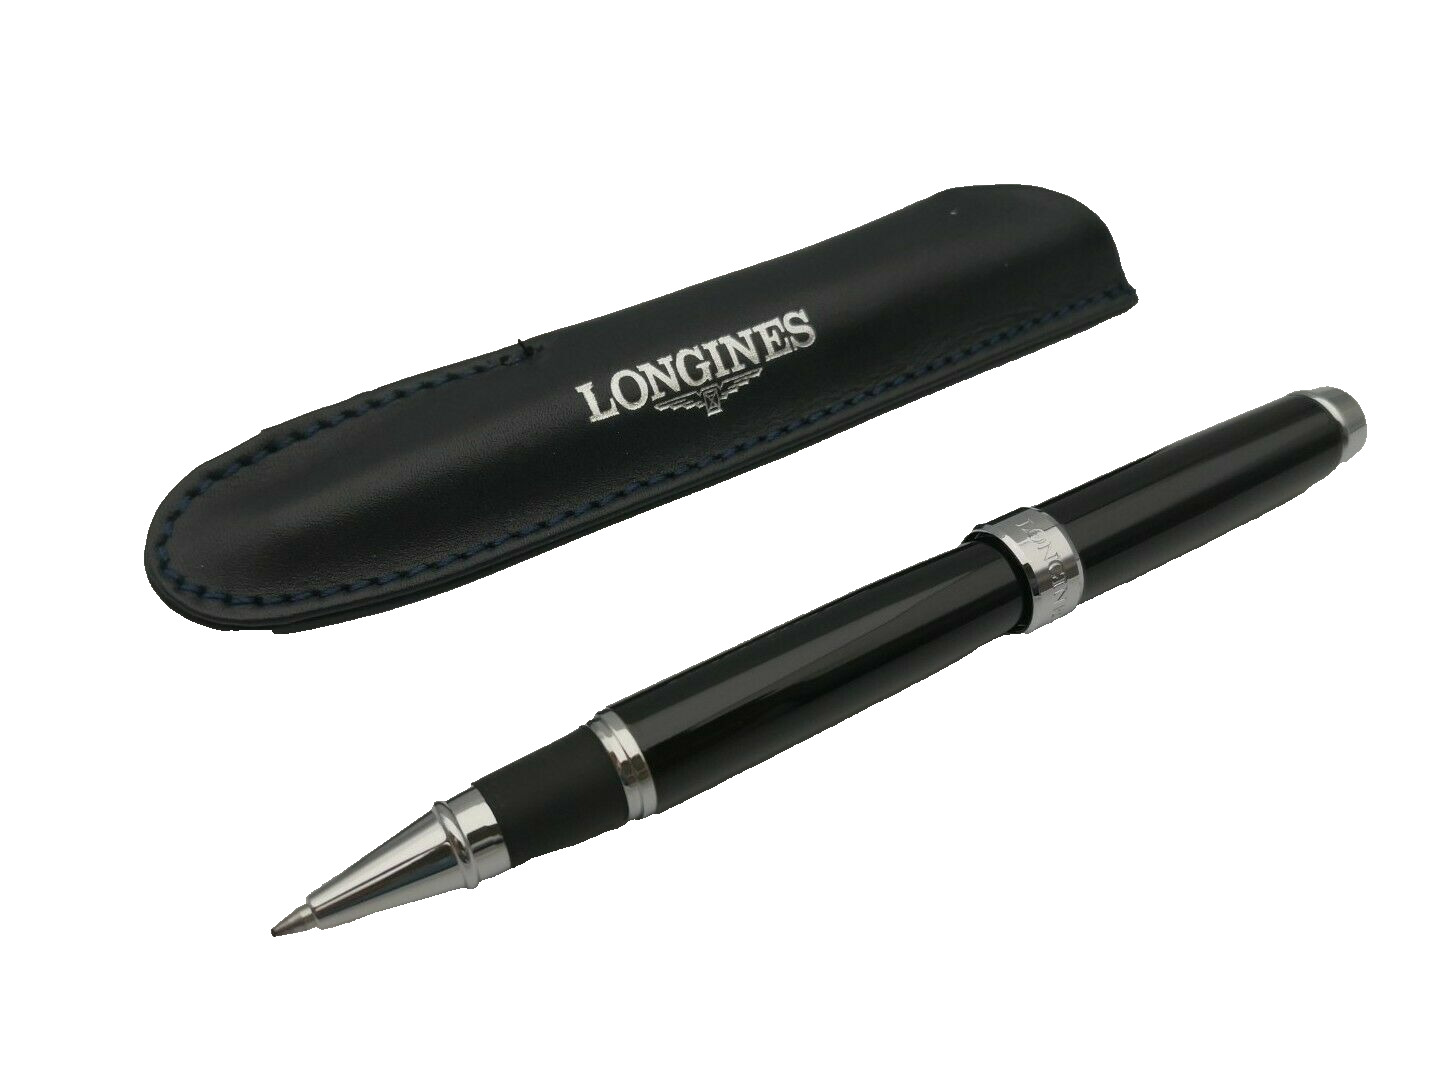 Longines Watches Rollerball Pen With Official Cover Marchandise Brand New NOS